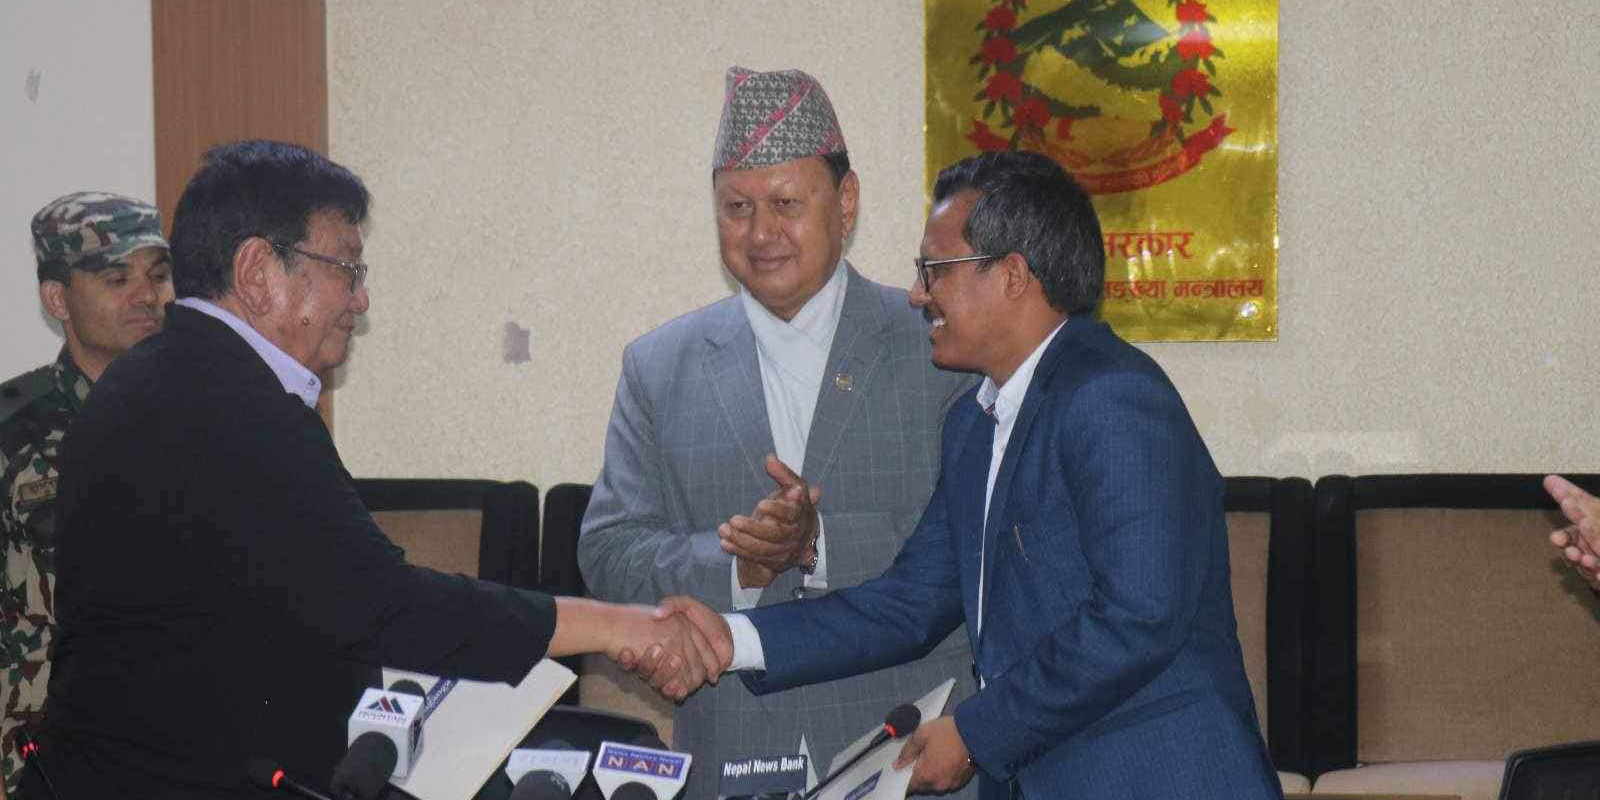 Agreement signed to expand eyecare services in Karnali